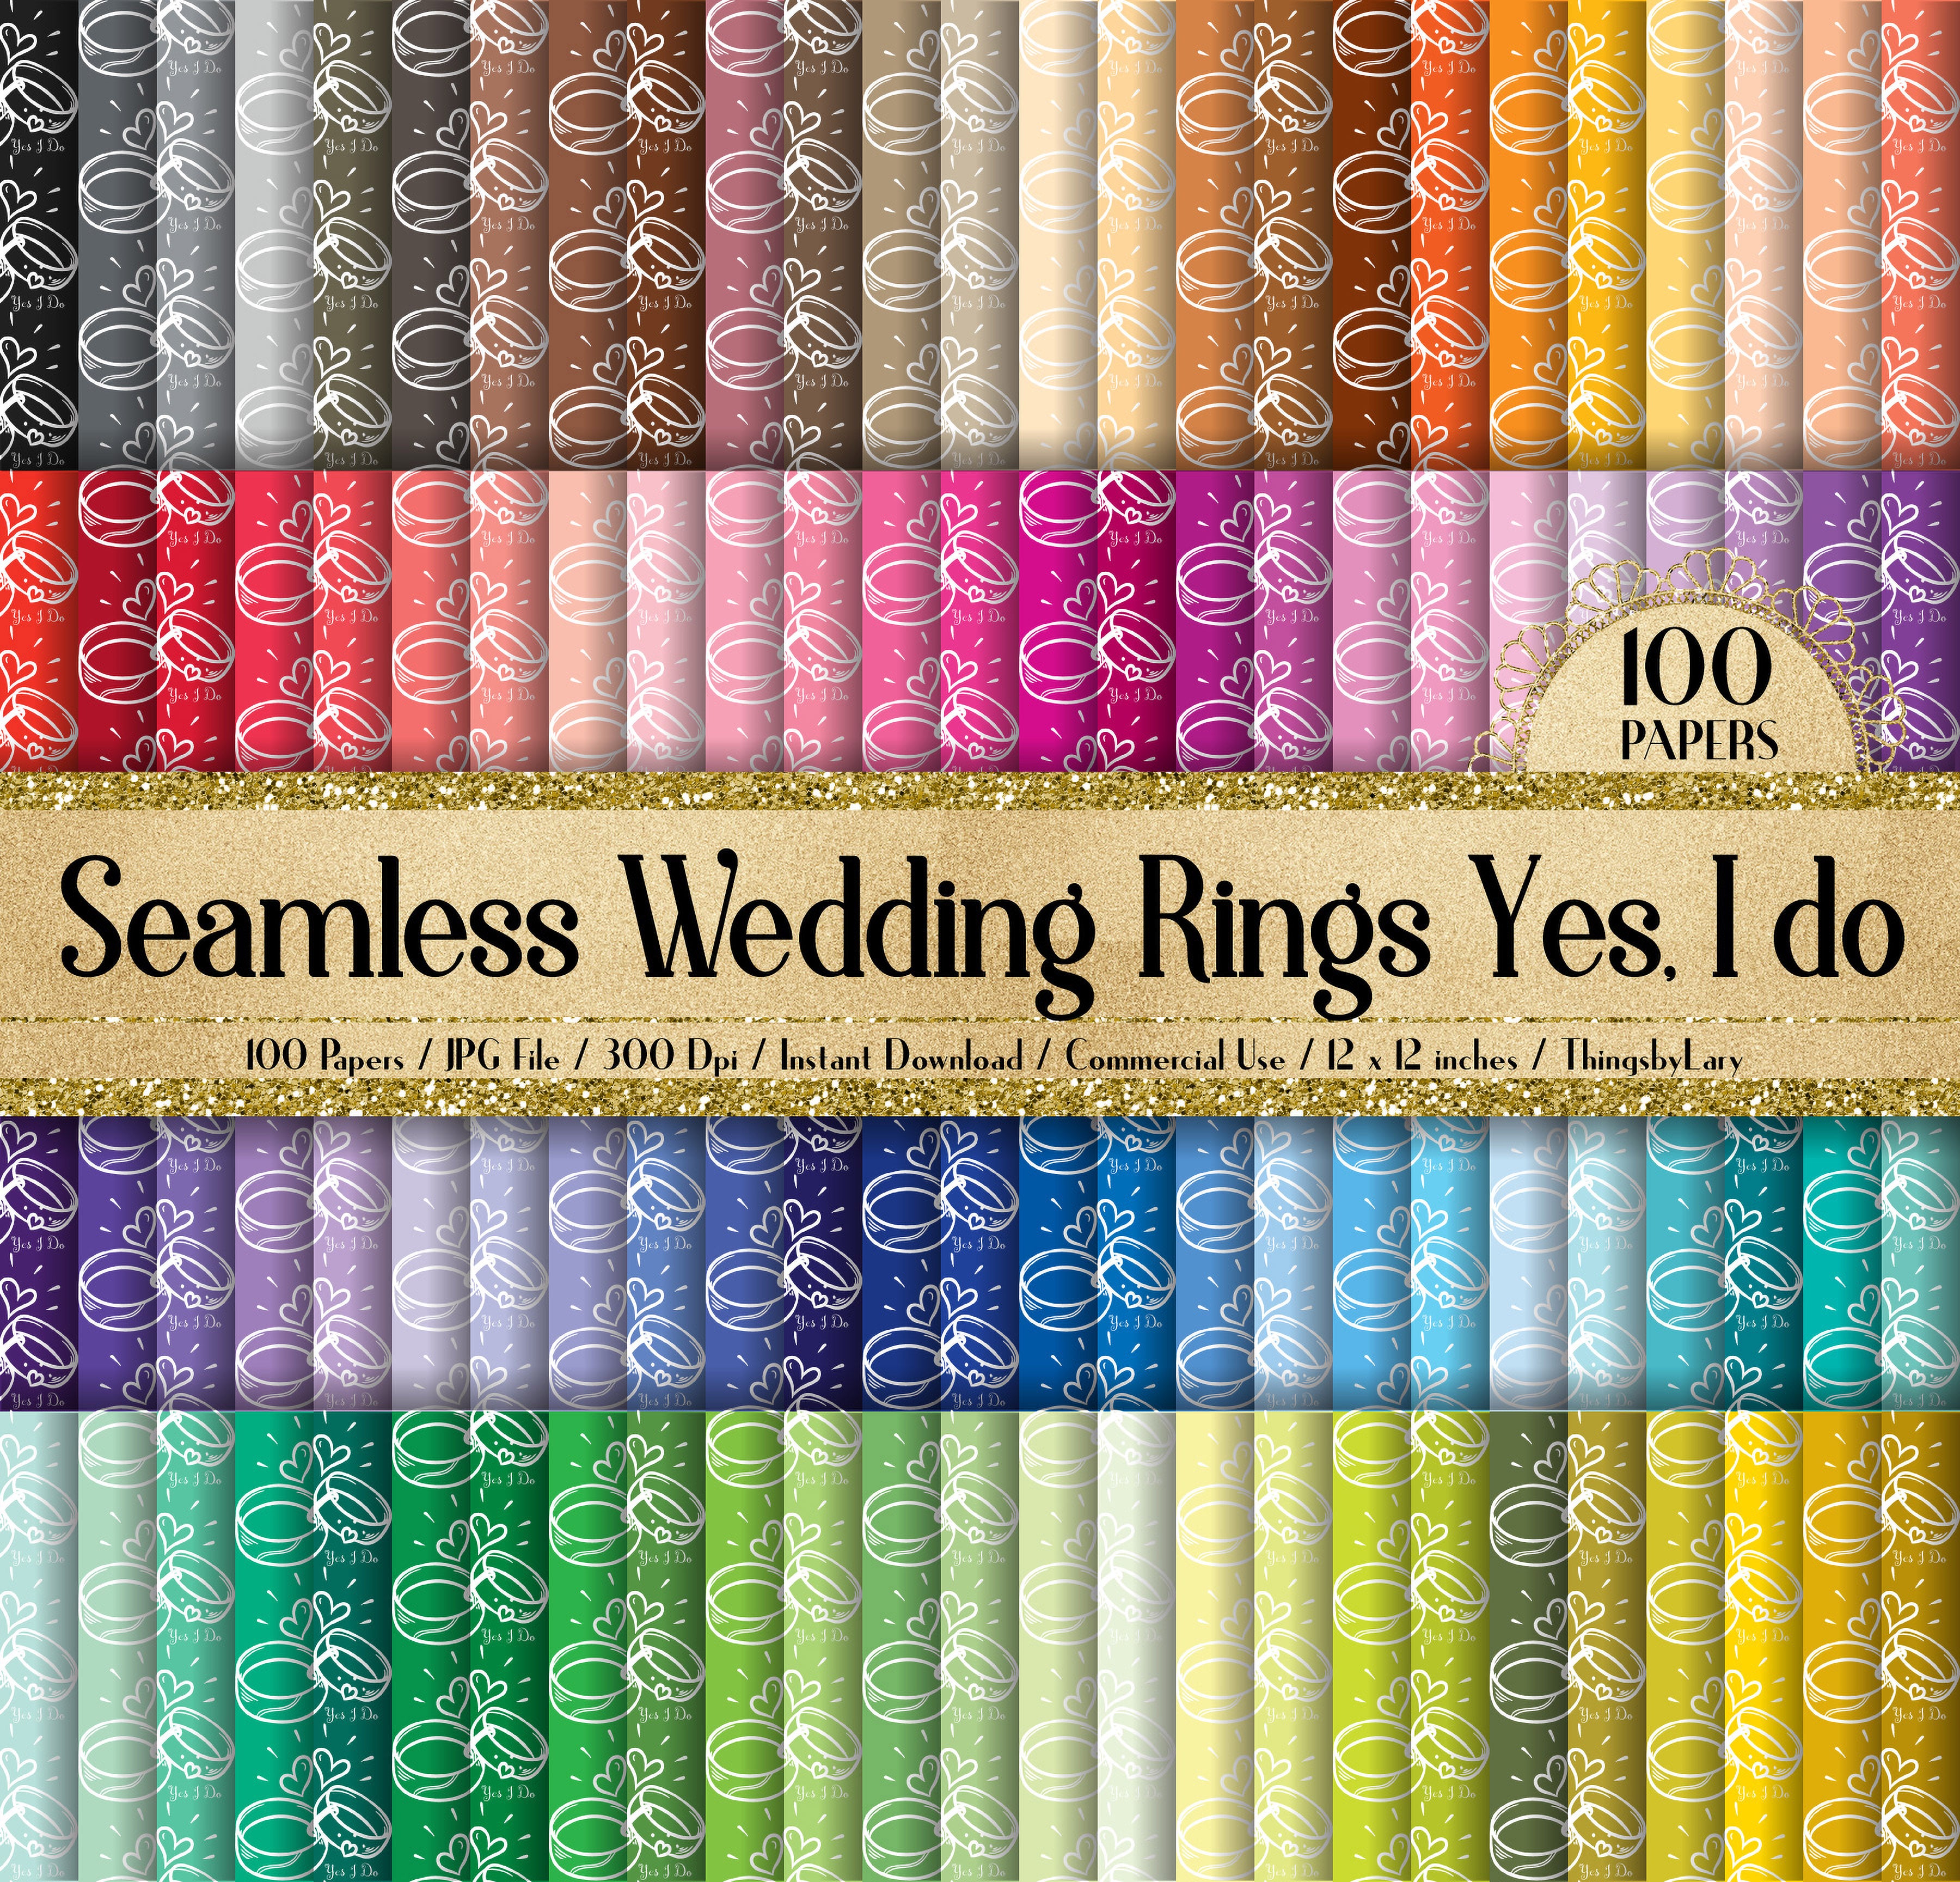 100 Seamless Wedding Rings Yes I Do Digital Papers